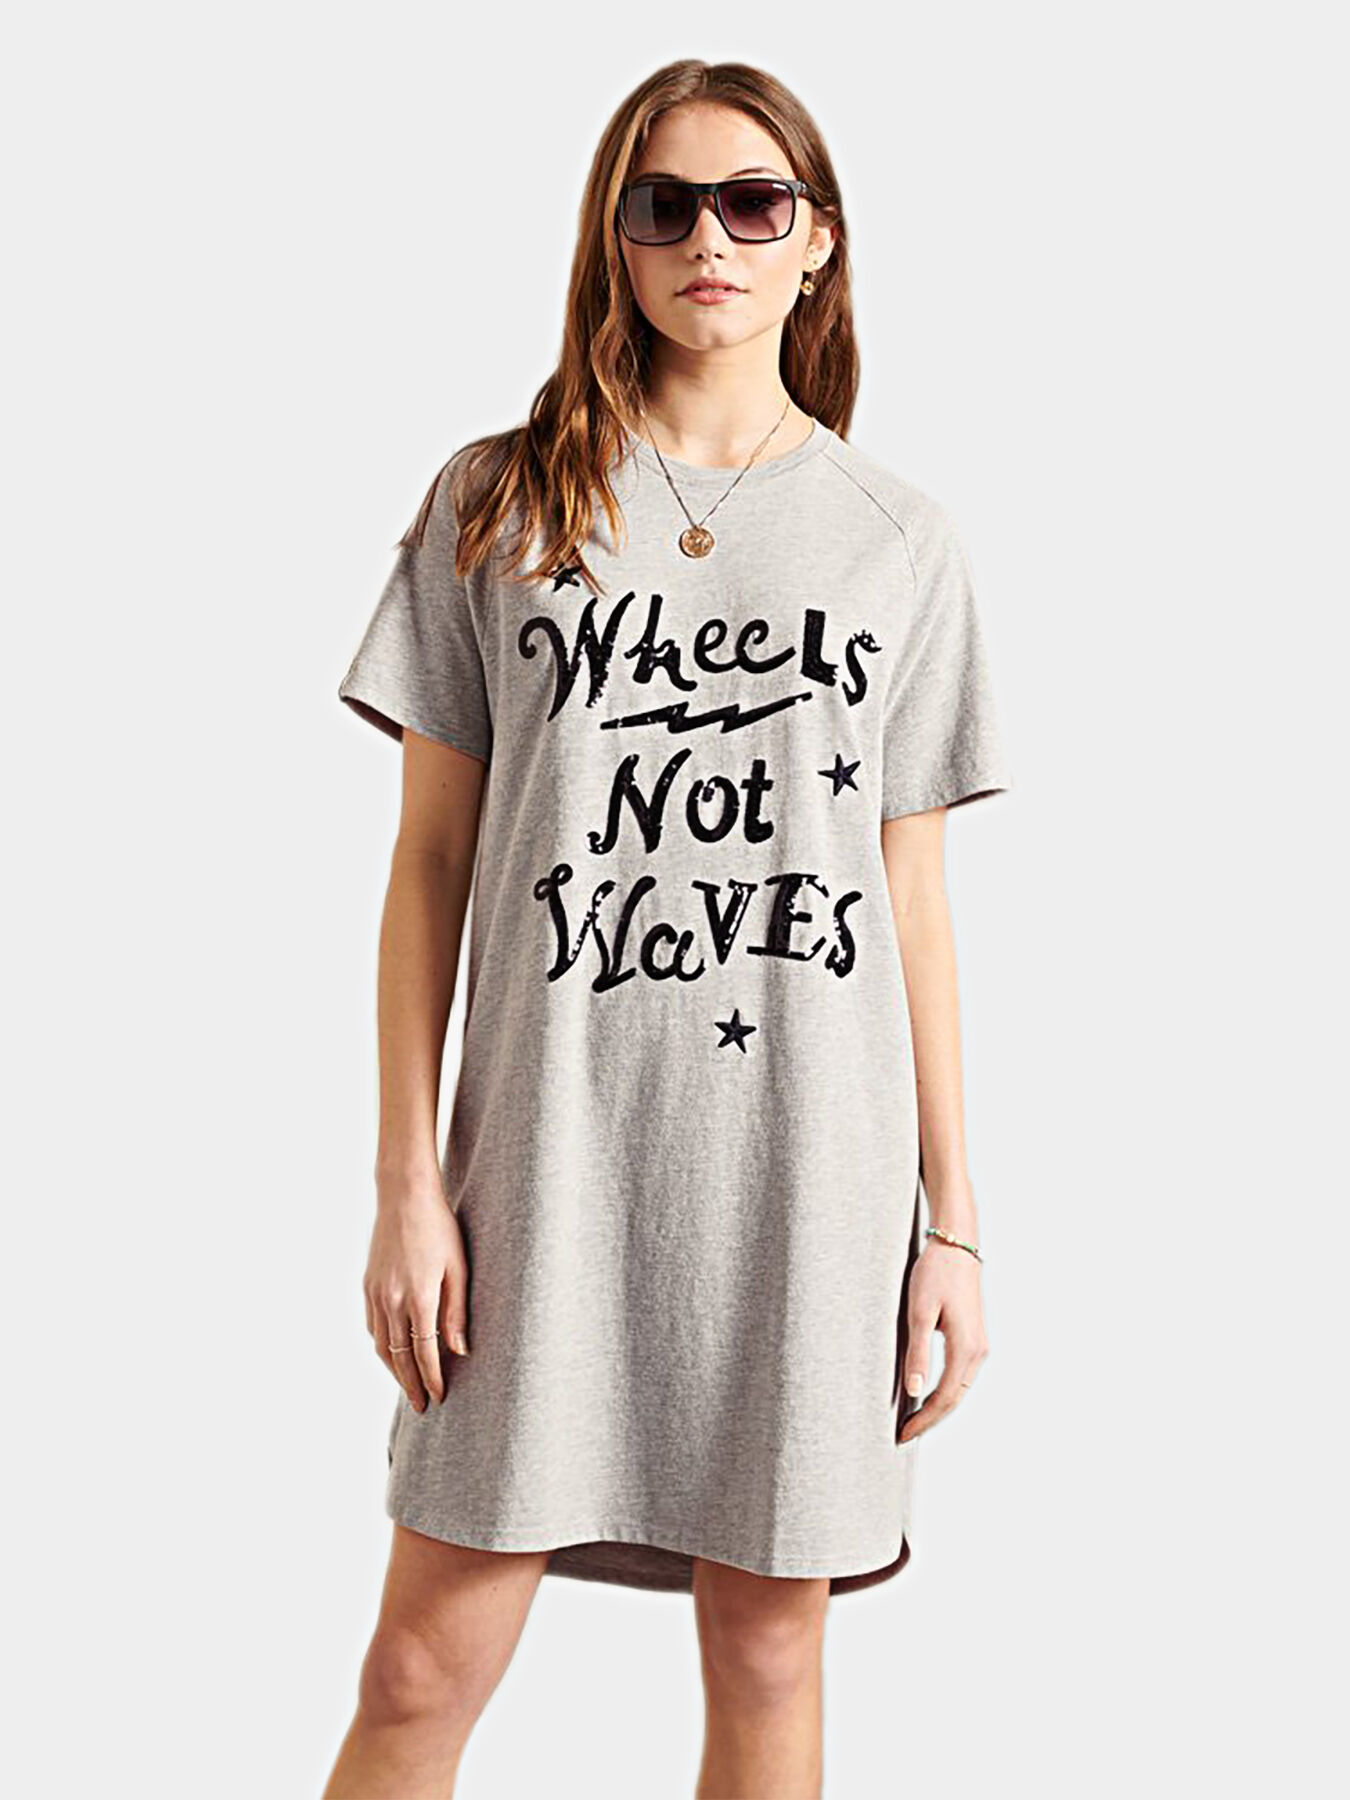 T-shirt dress with contrasting print ...